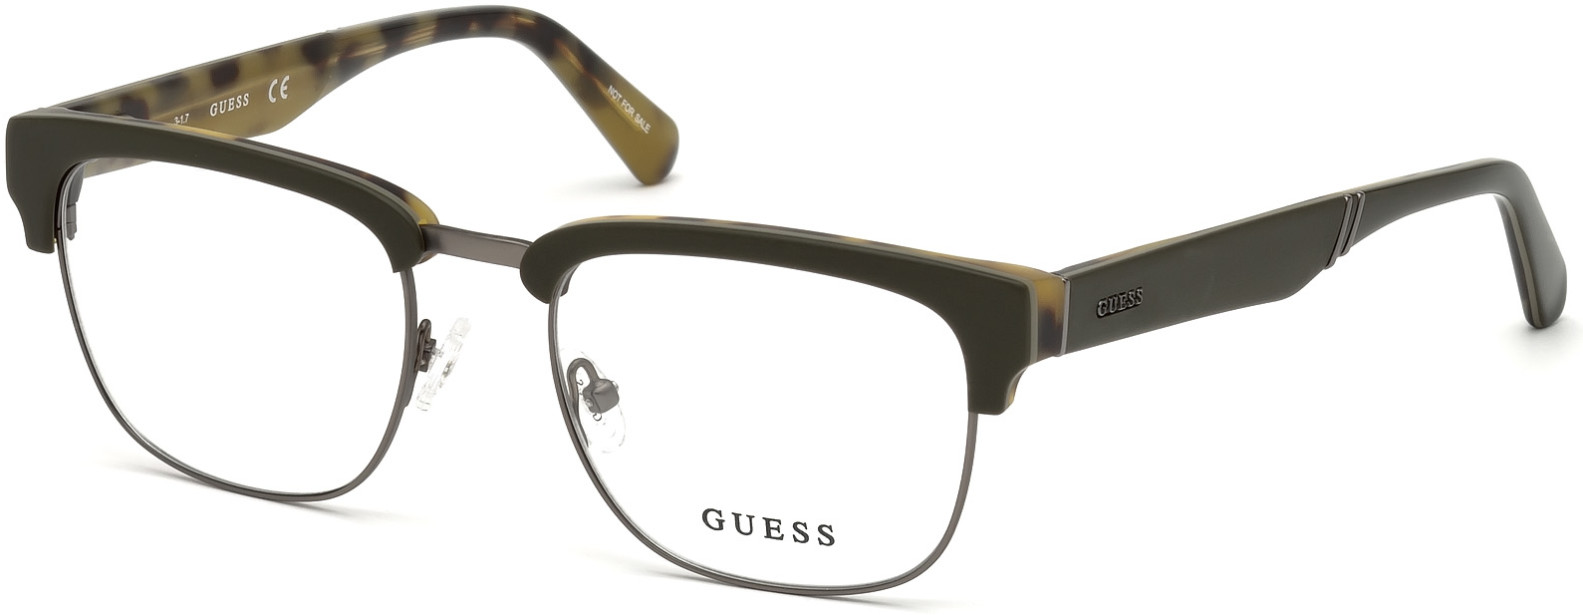 GUESS 1942 097